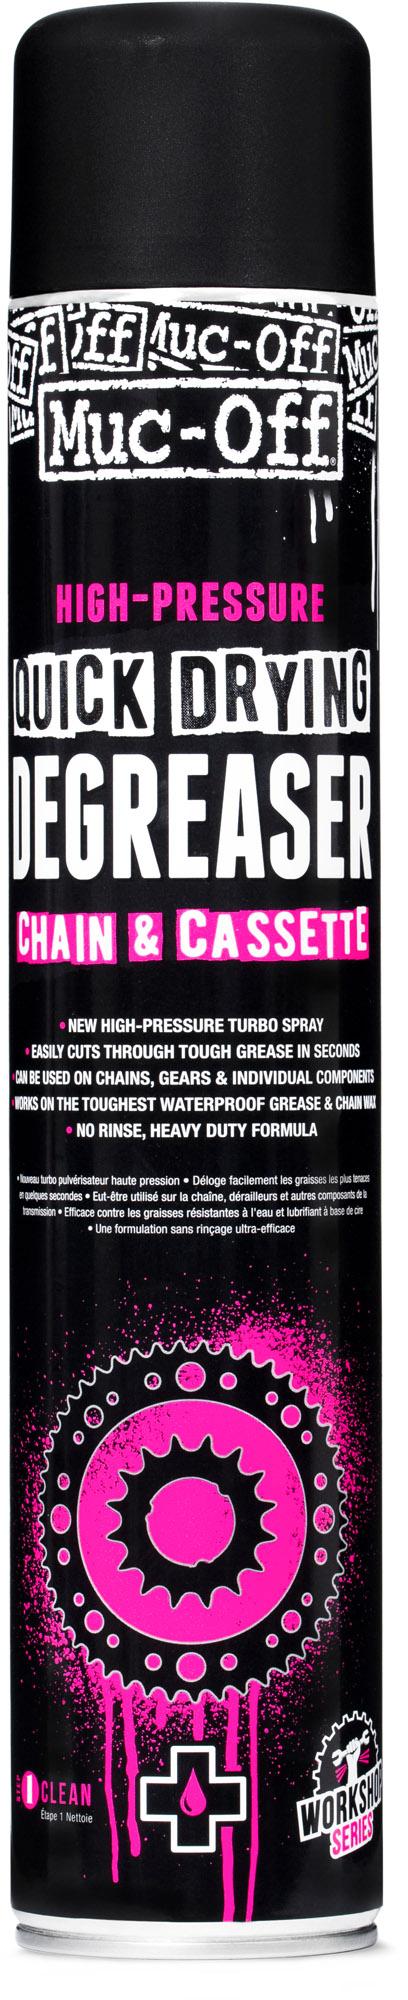 Muc-off High-pressure Quick Dry Degreaser -750ml  Neutral